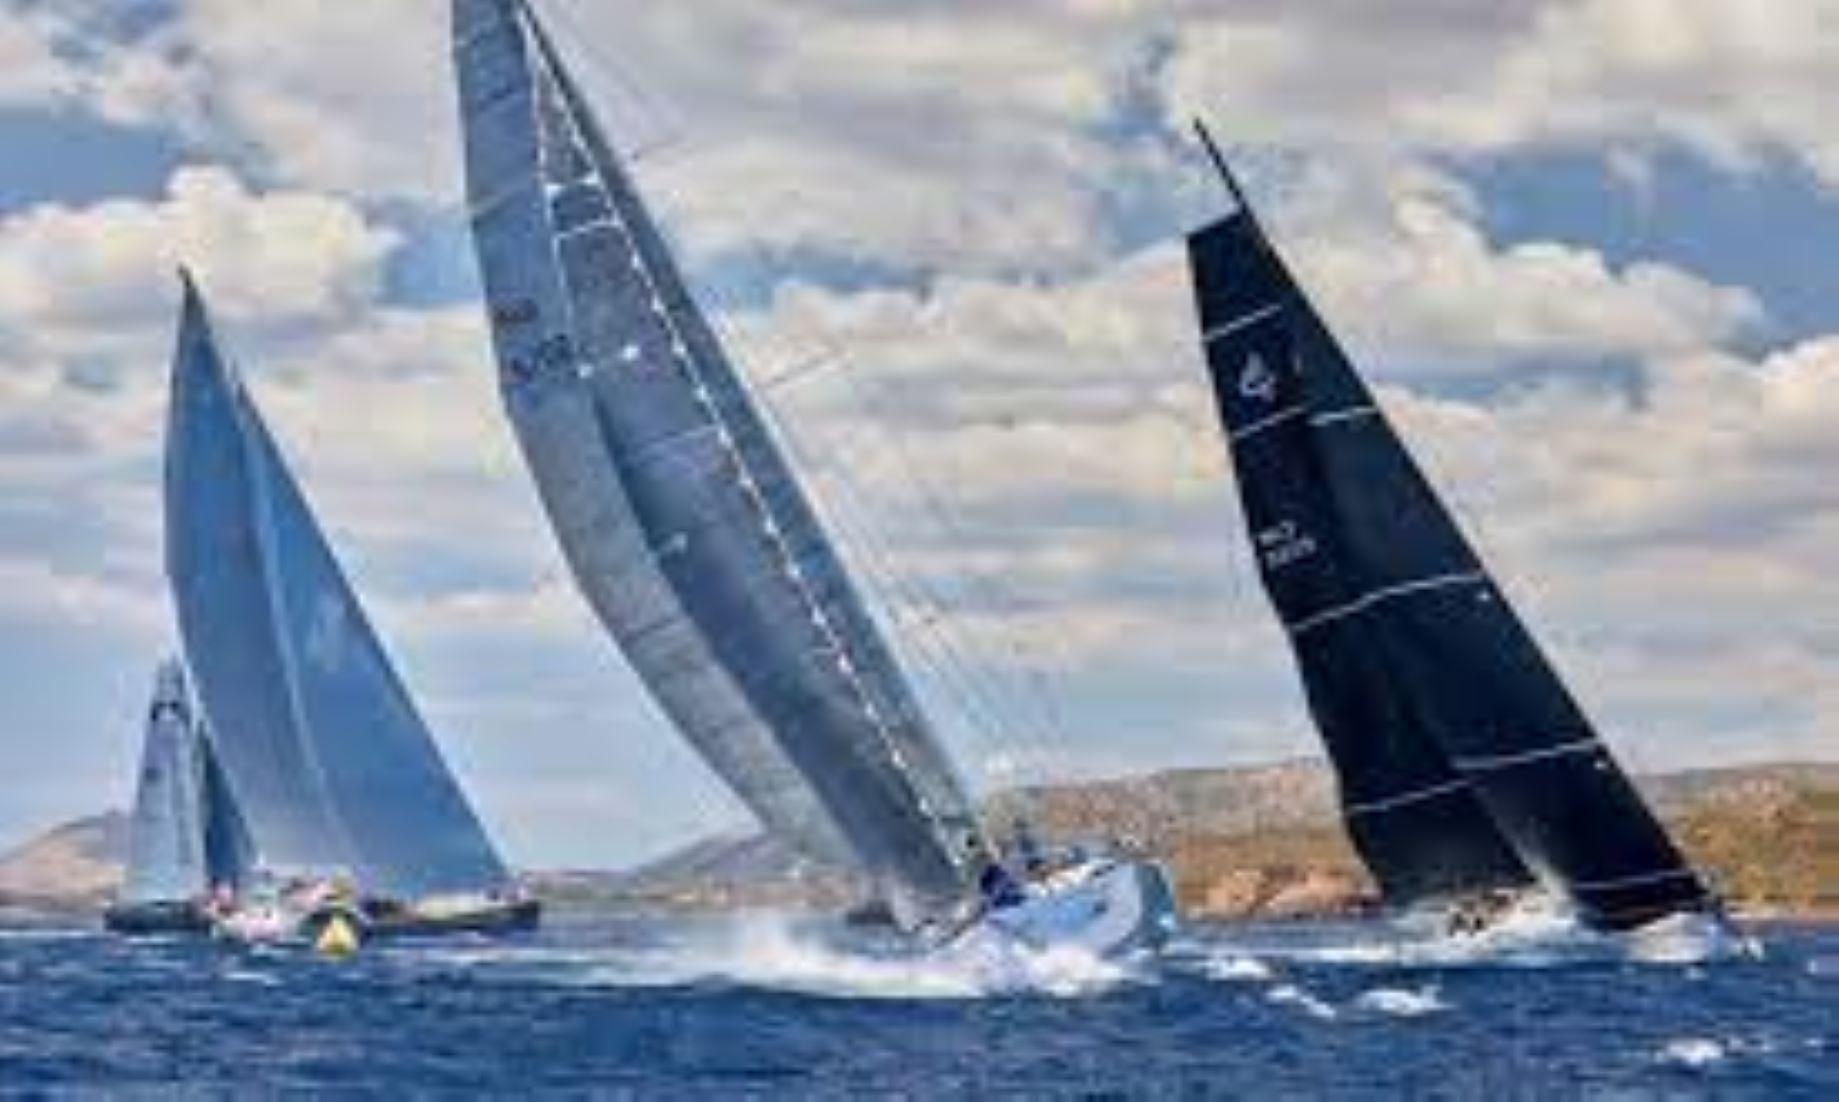 International Offshore Sailing Race “AEGEAN 600” Kicked Off In Greece